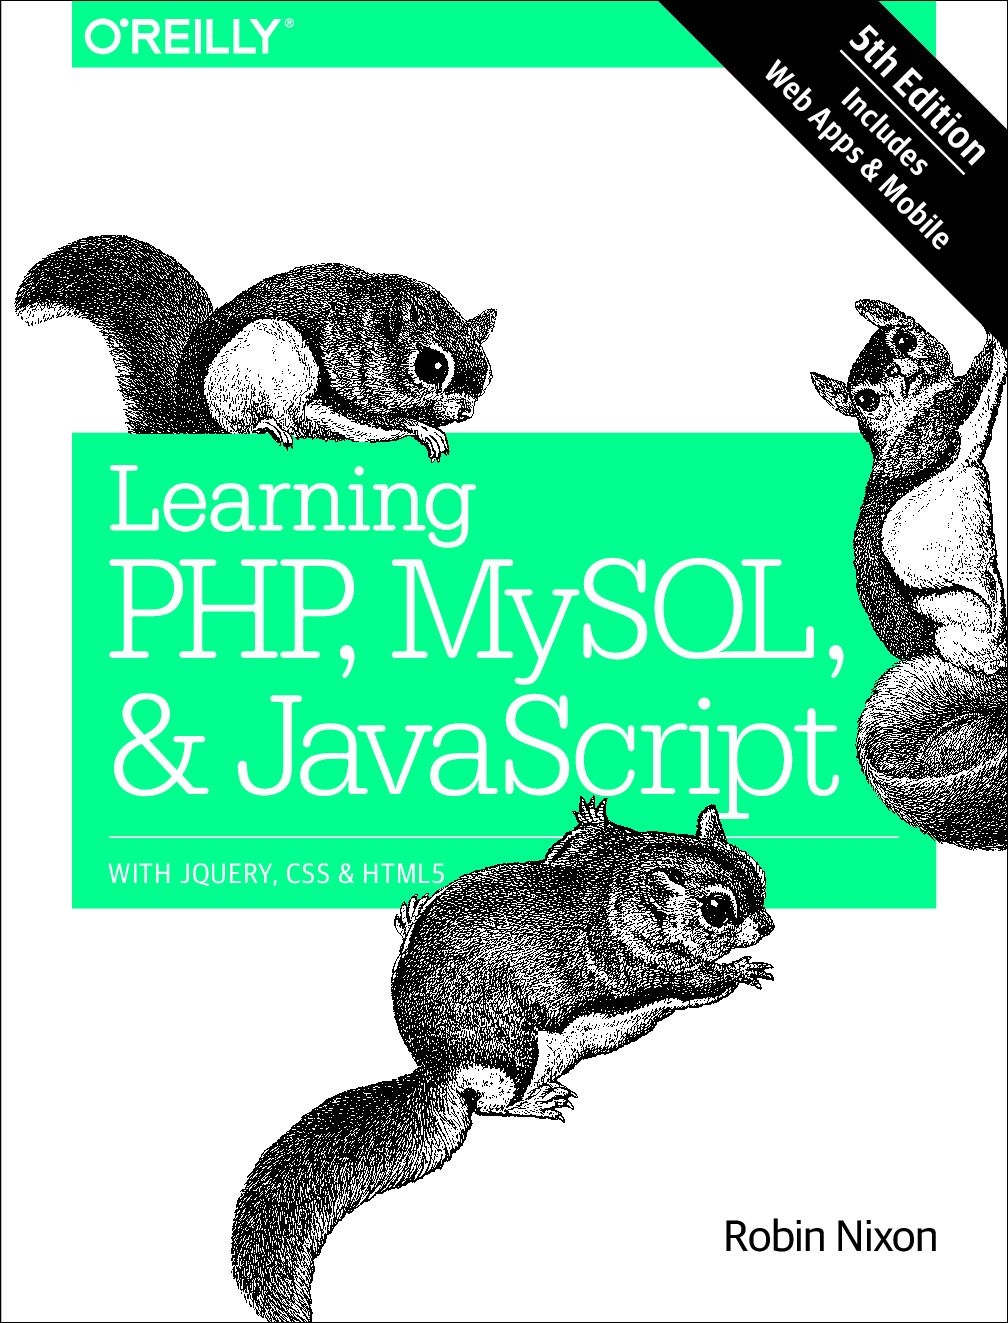 Learning PHP, MySQL & JavaScript_ With jQuery, CSS & HTML5